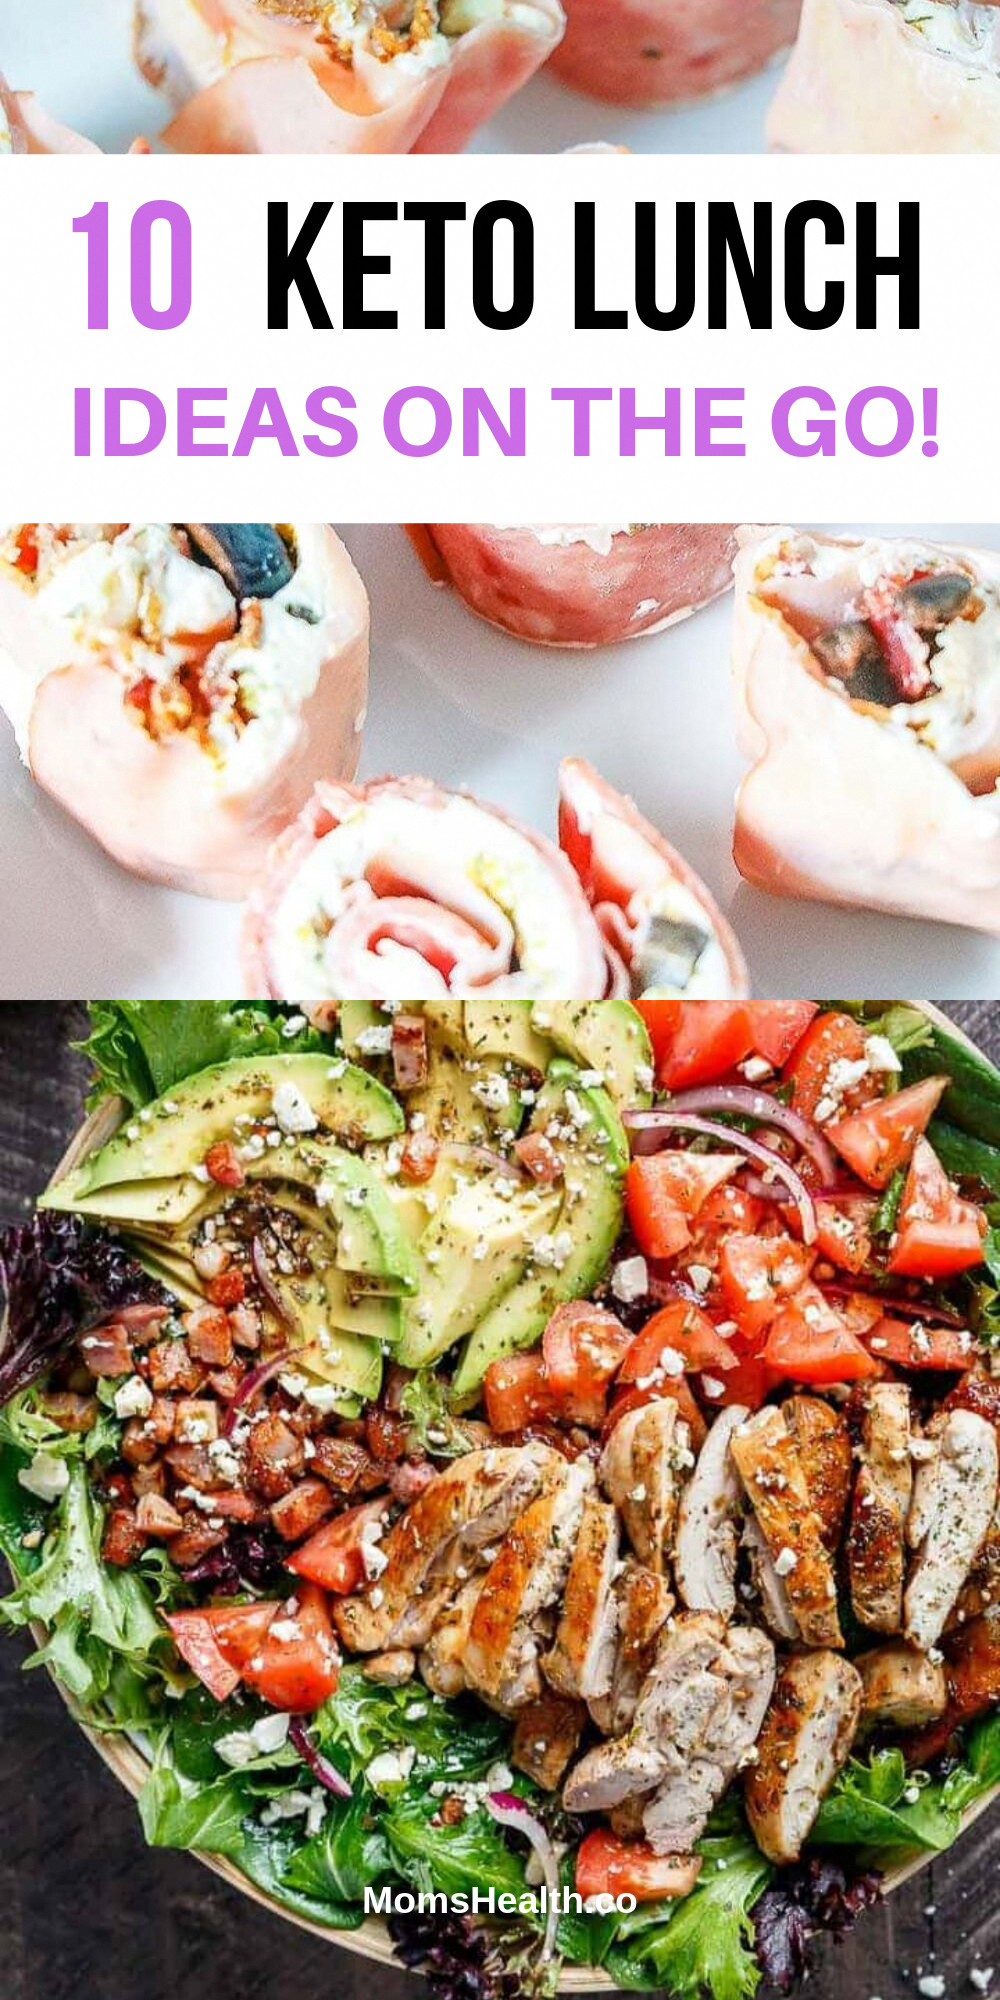 Healthy Keto Lunches For Work
 10 Easy Keto Lunch Ideas on the Go – Keto Lunch for Work